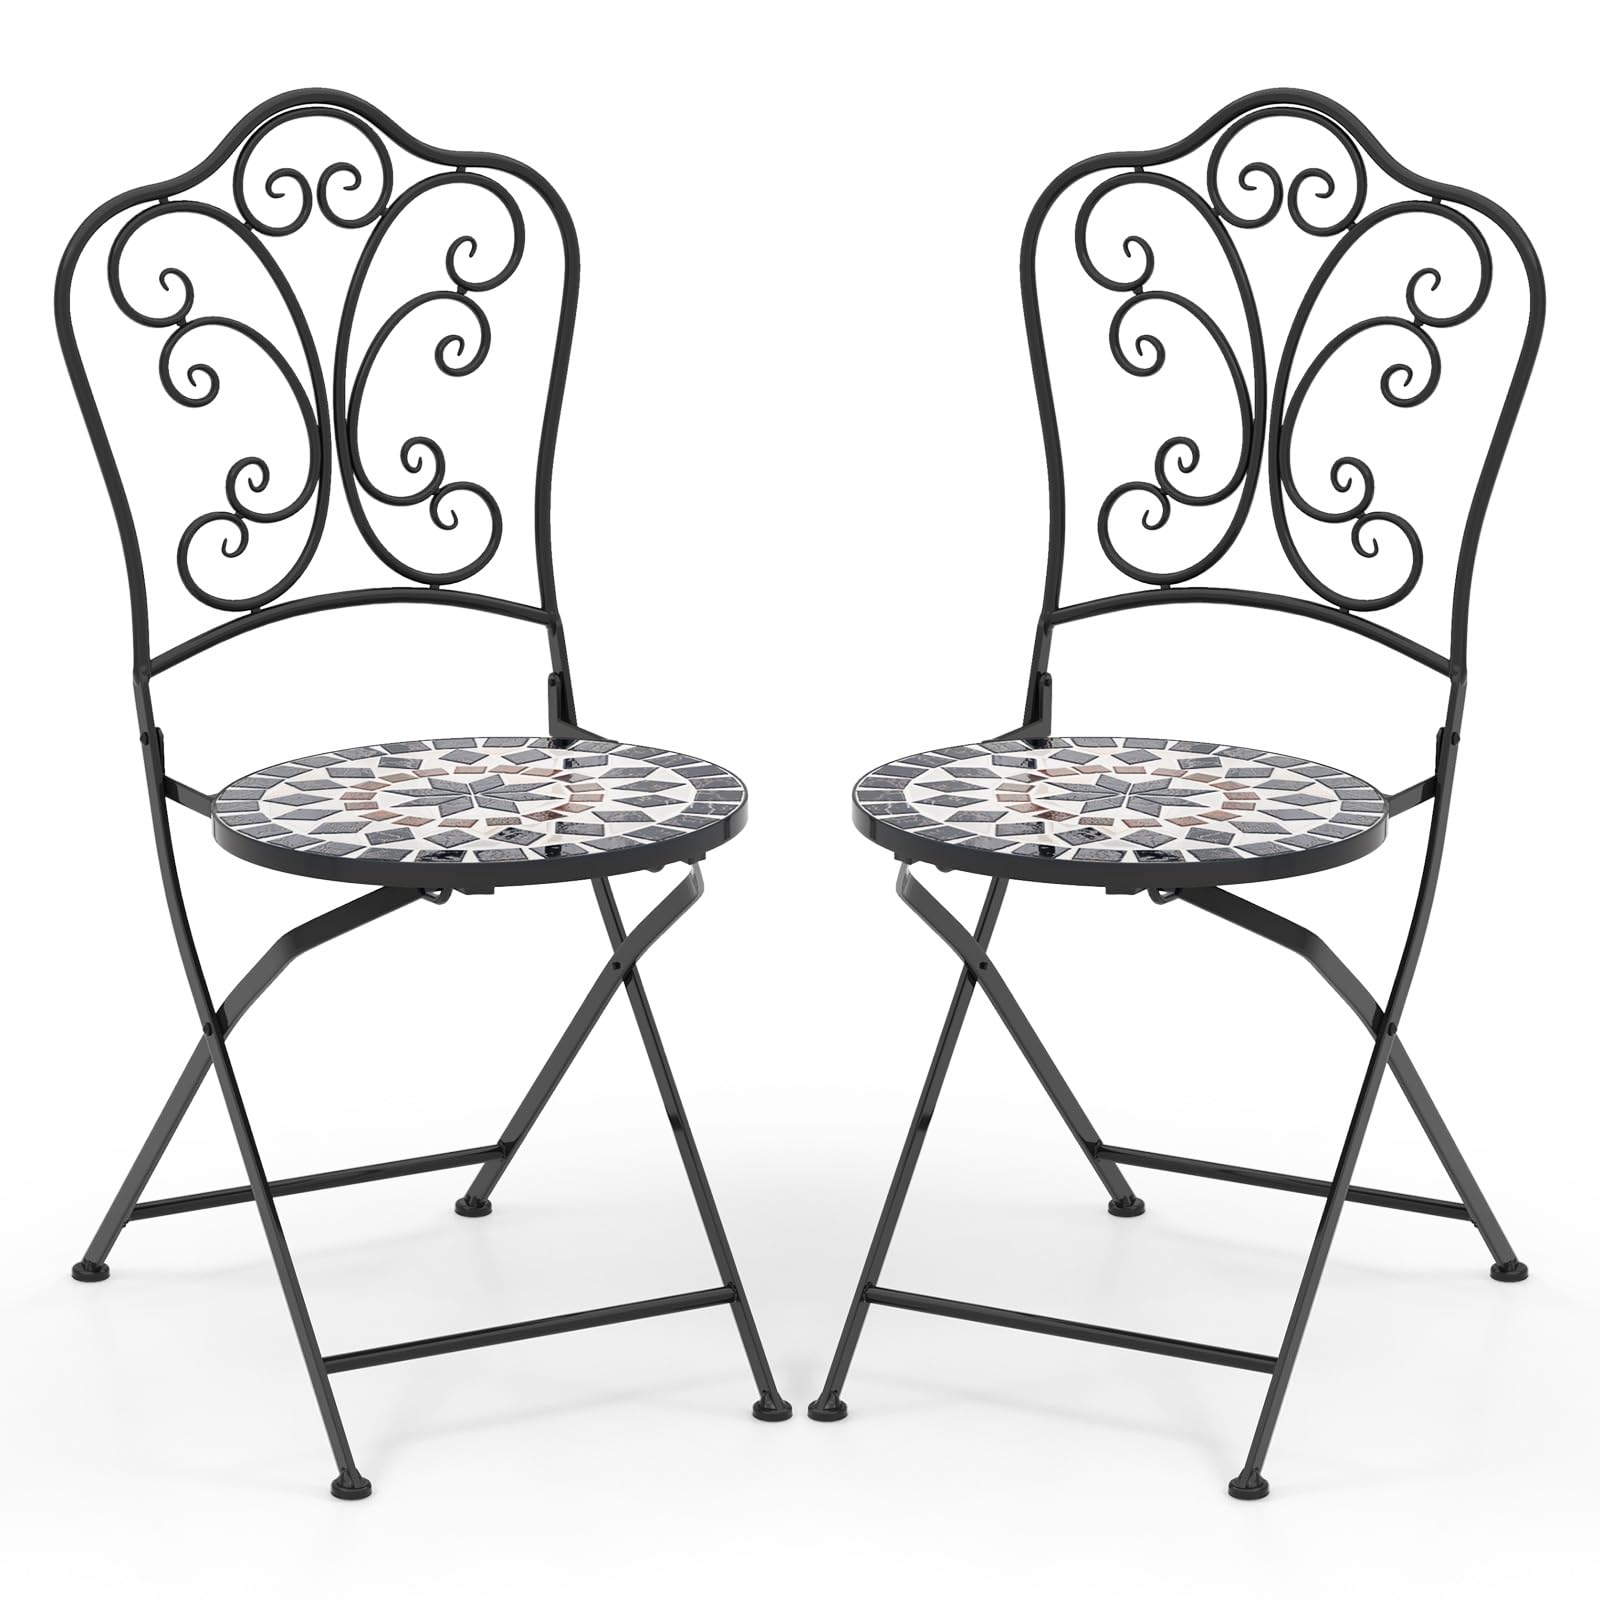 Giantex Patio Folding Chairs, Mosaic Bistro Chairs w/Backrest & Round Seat for Porch Balcony Lawn